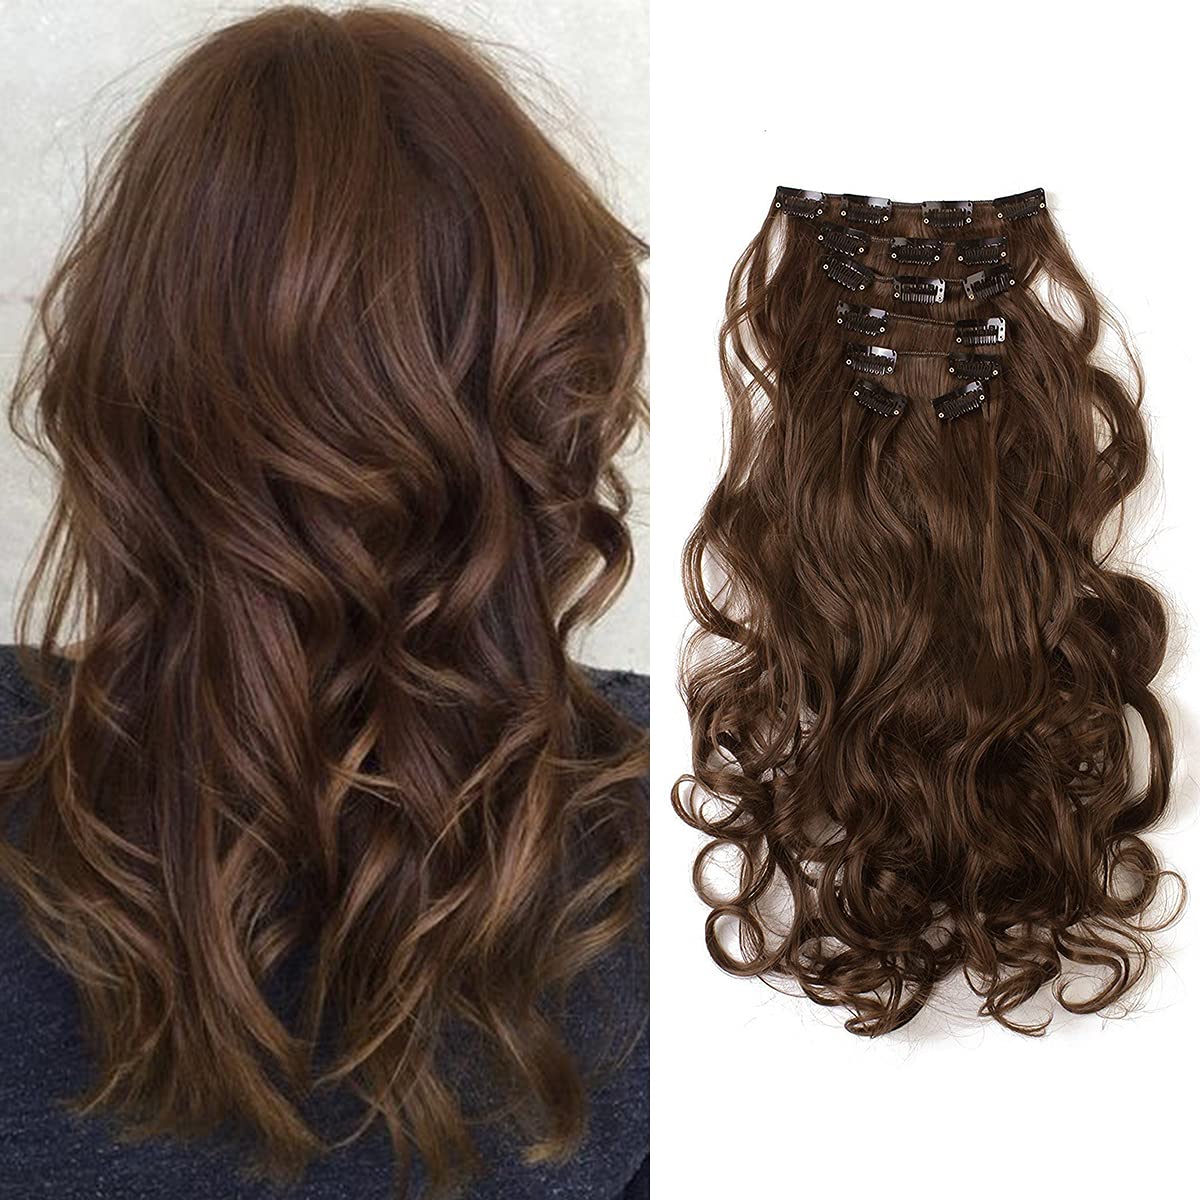 Clip in Hair Extensions 7 Piece 20" Inch